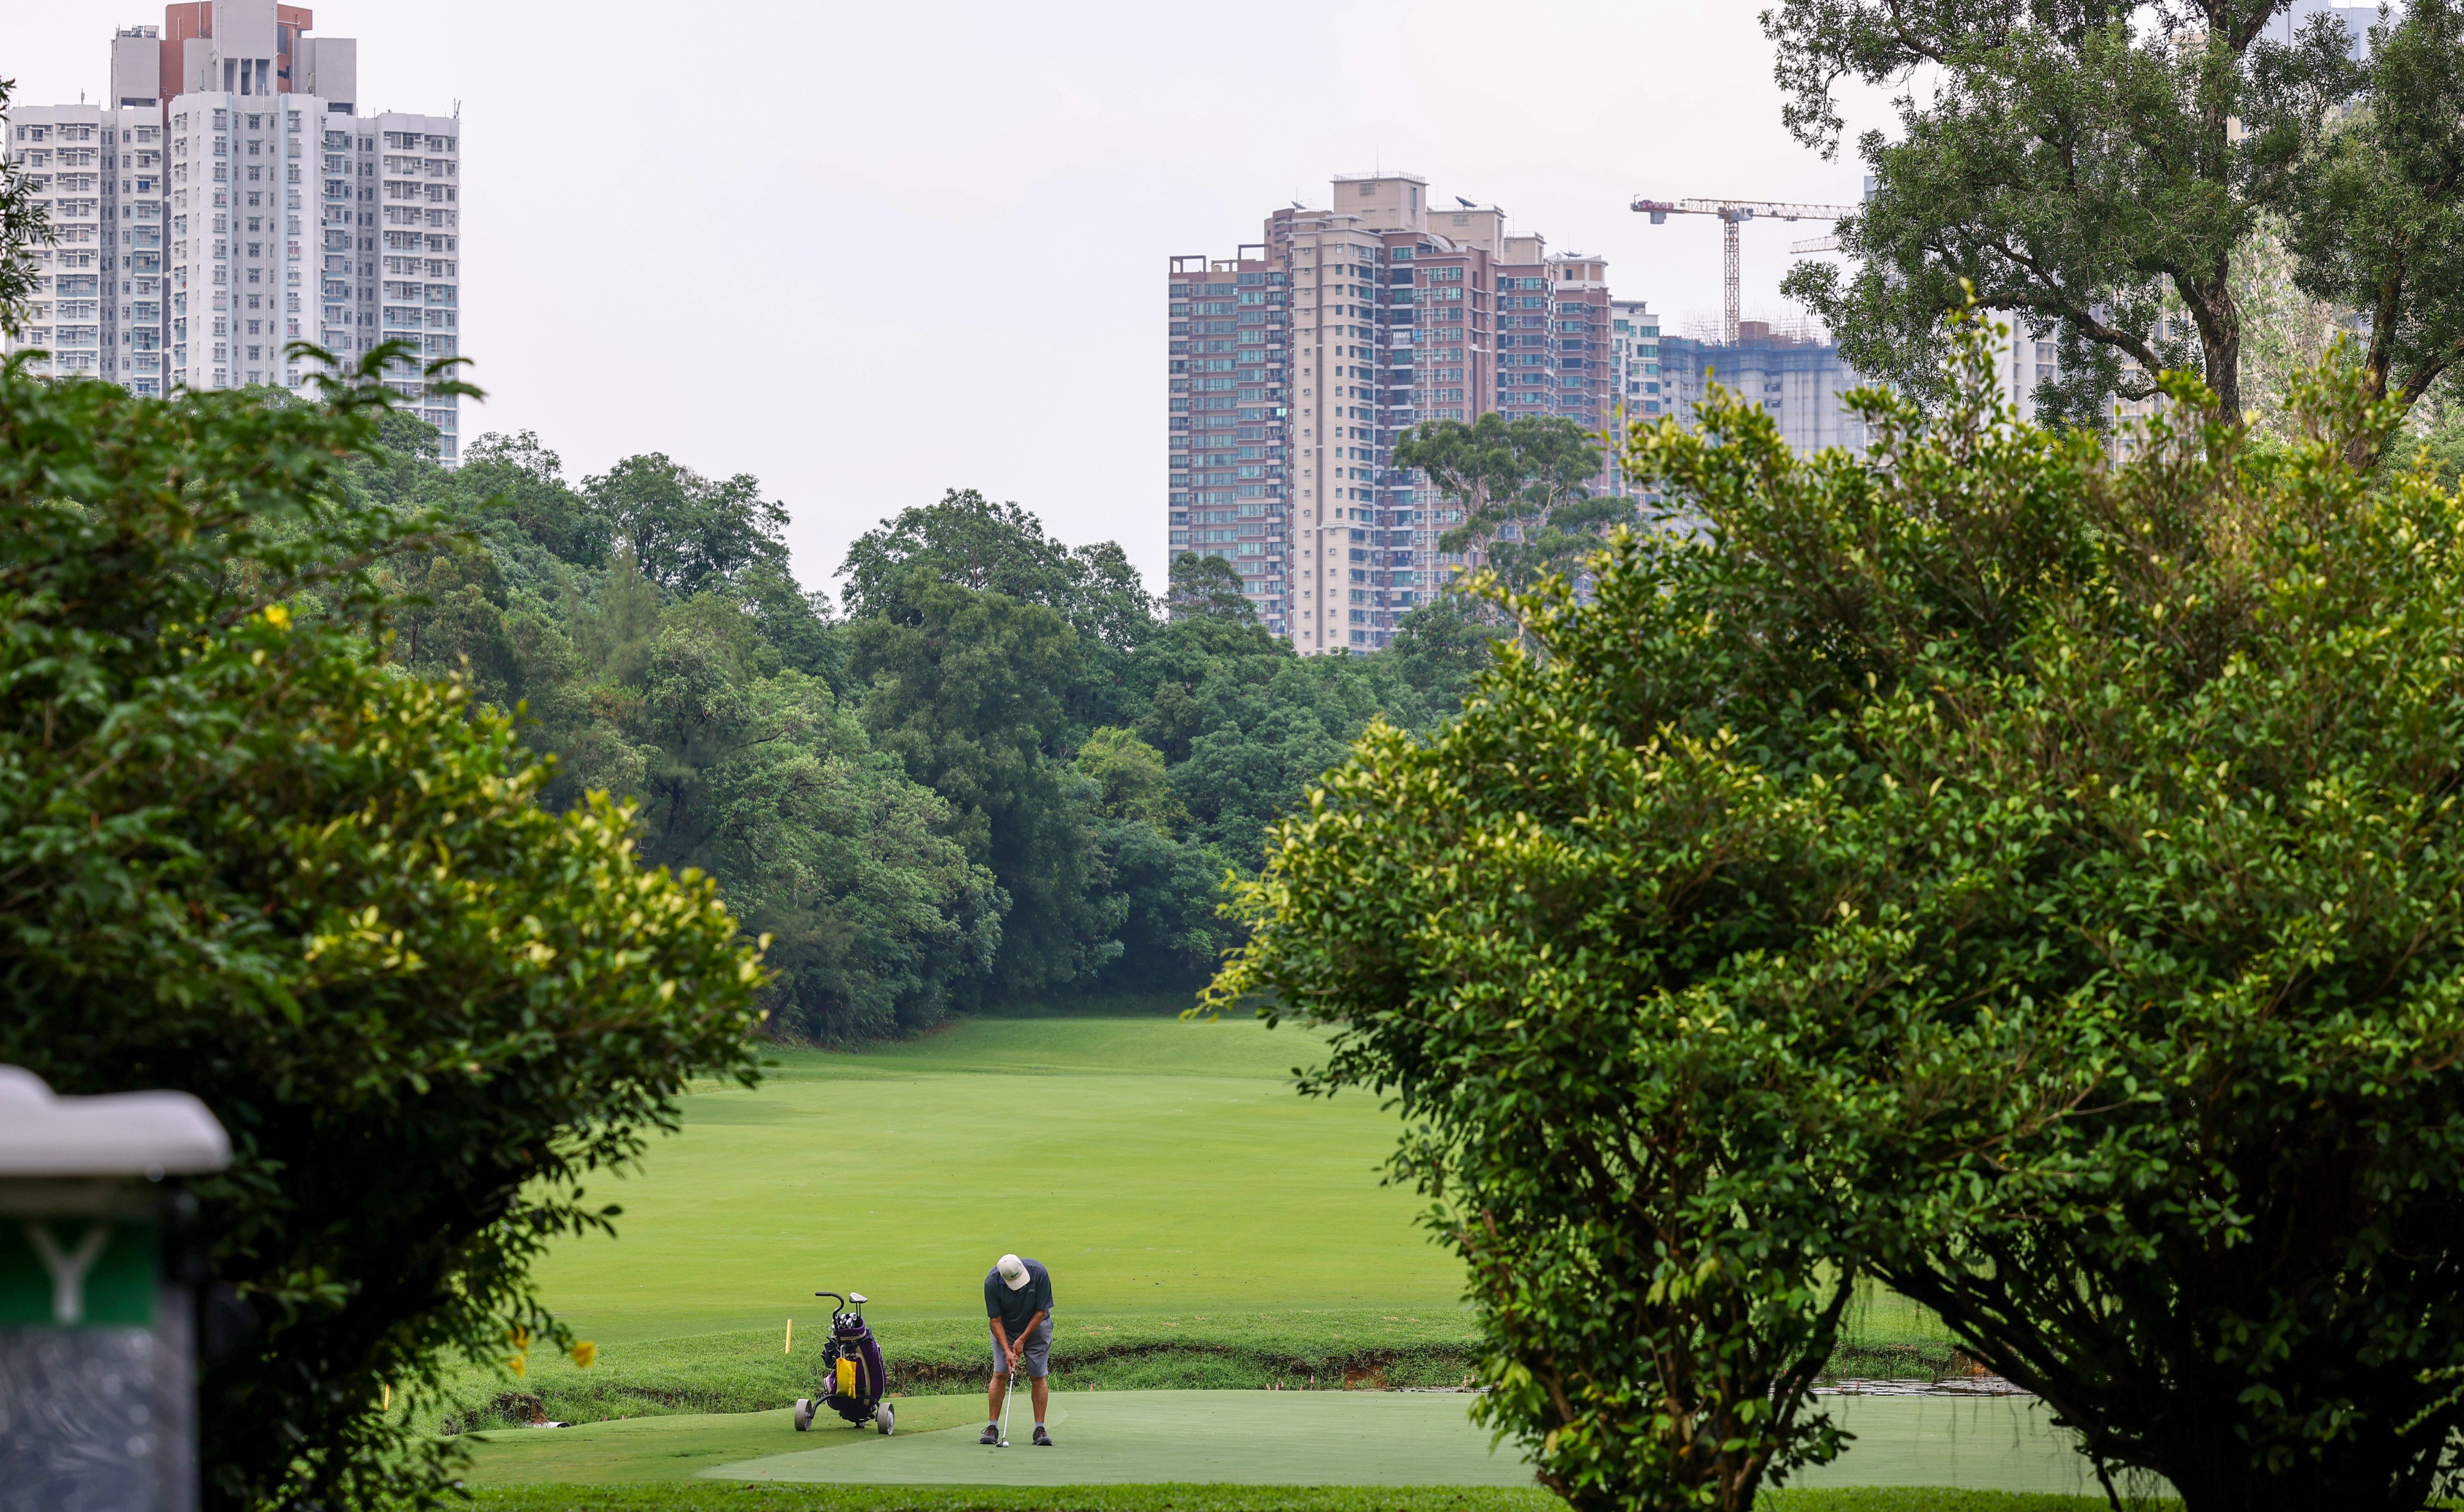 A golfer at play at the Hong Kong Golf Club in Fanling on June 14. Hong Kong Golf Club currently operates three 18-hole courses in the area. Photo: Dickson Lee